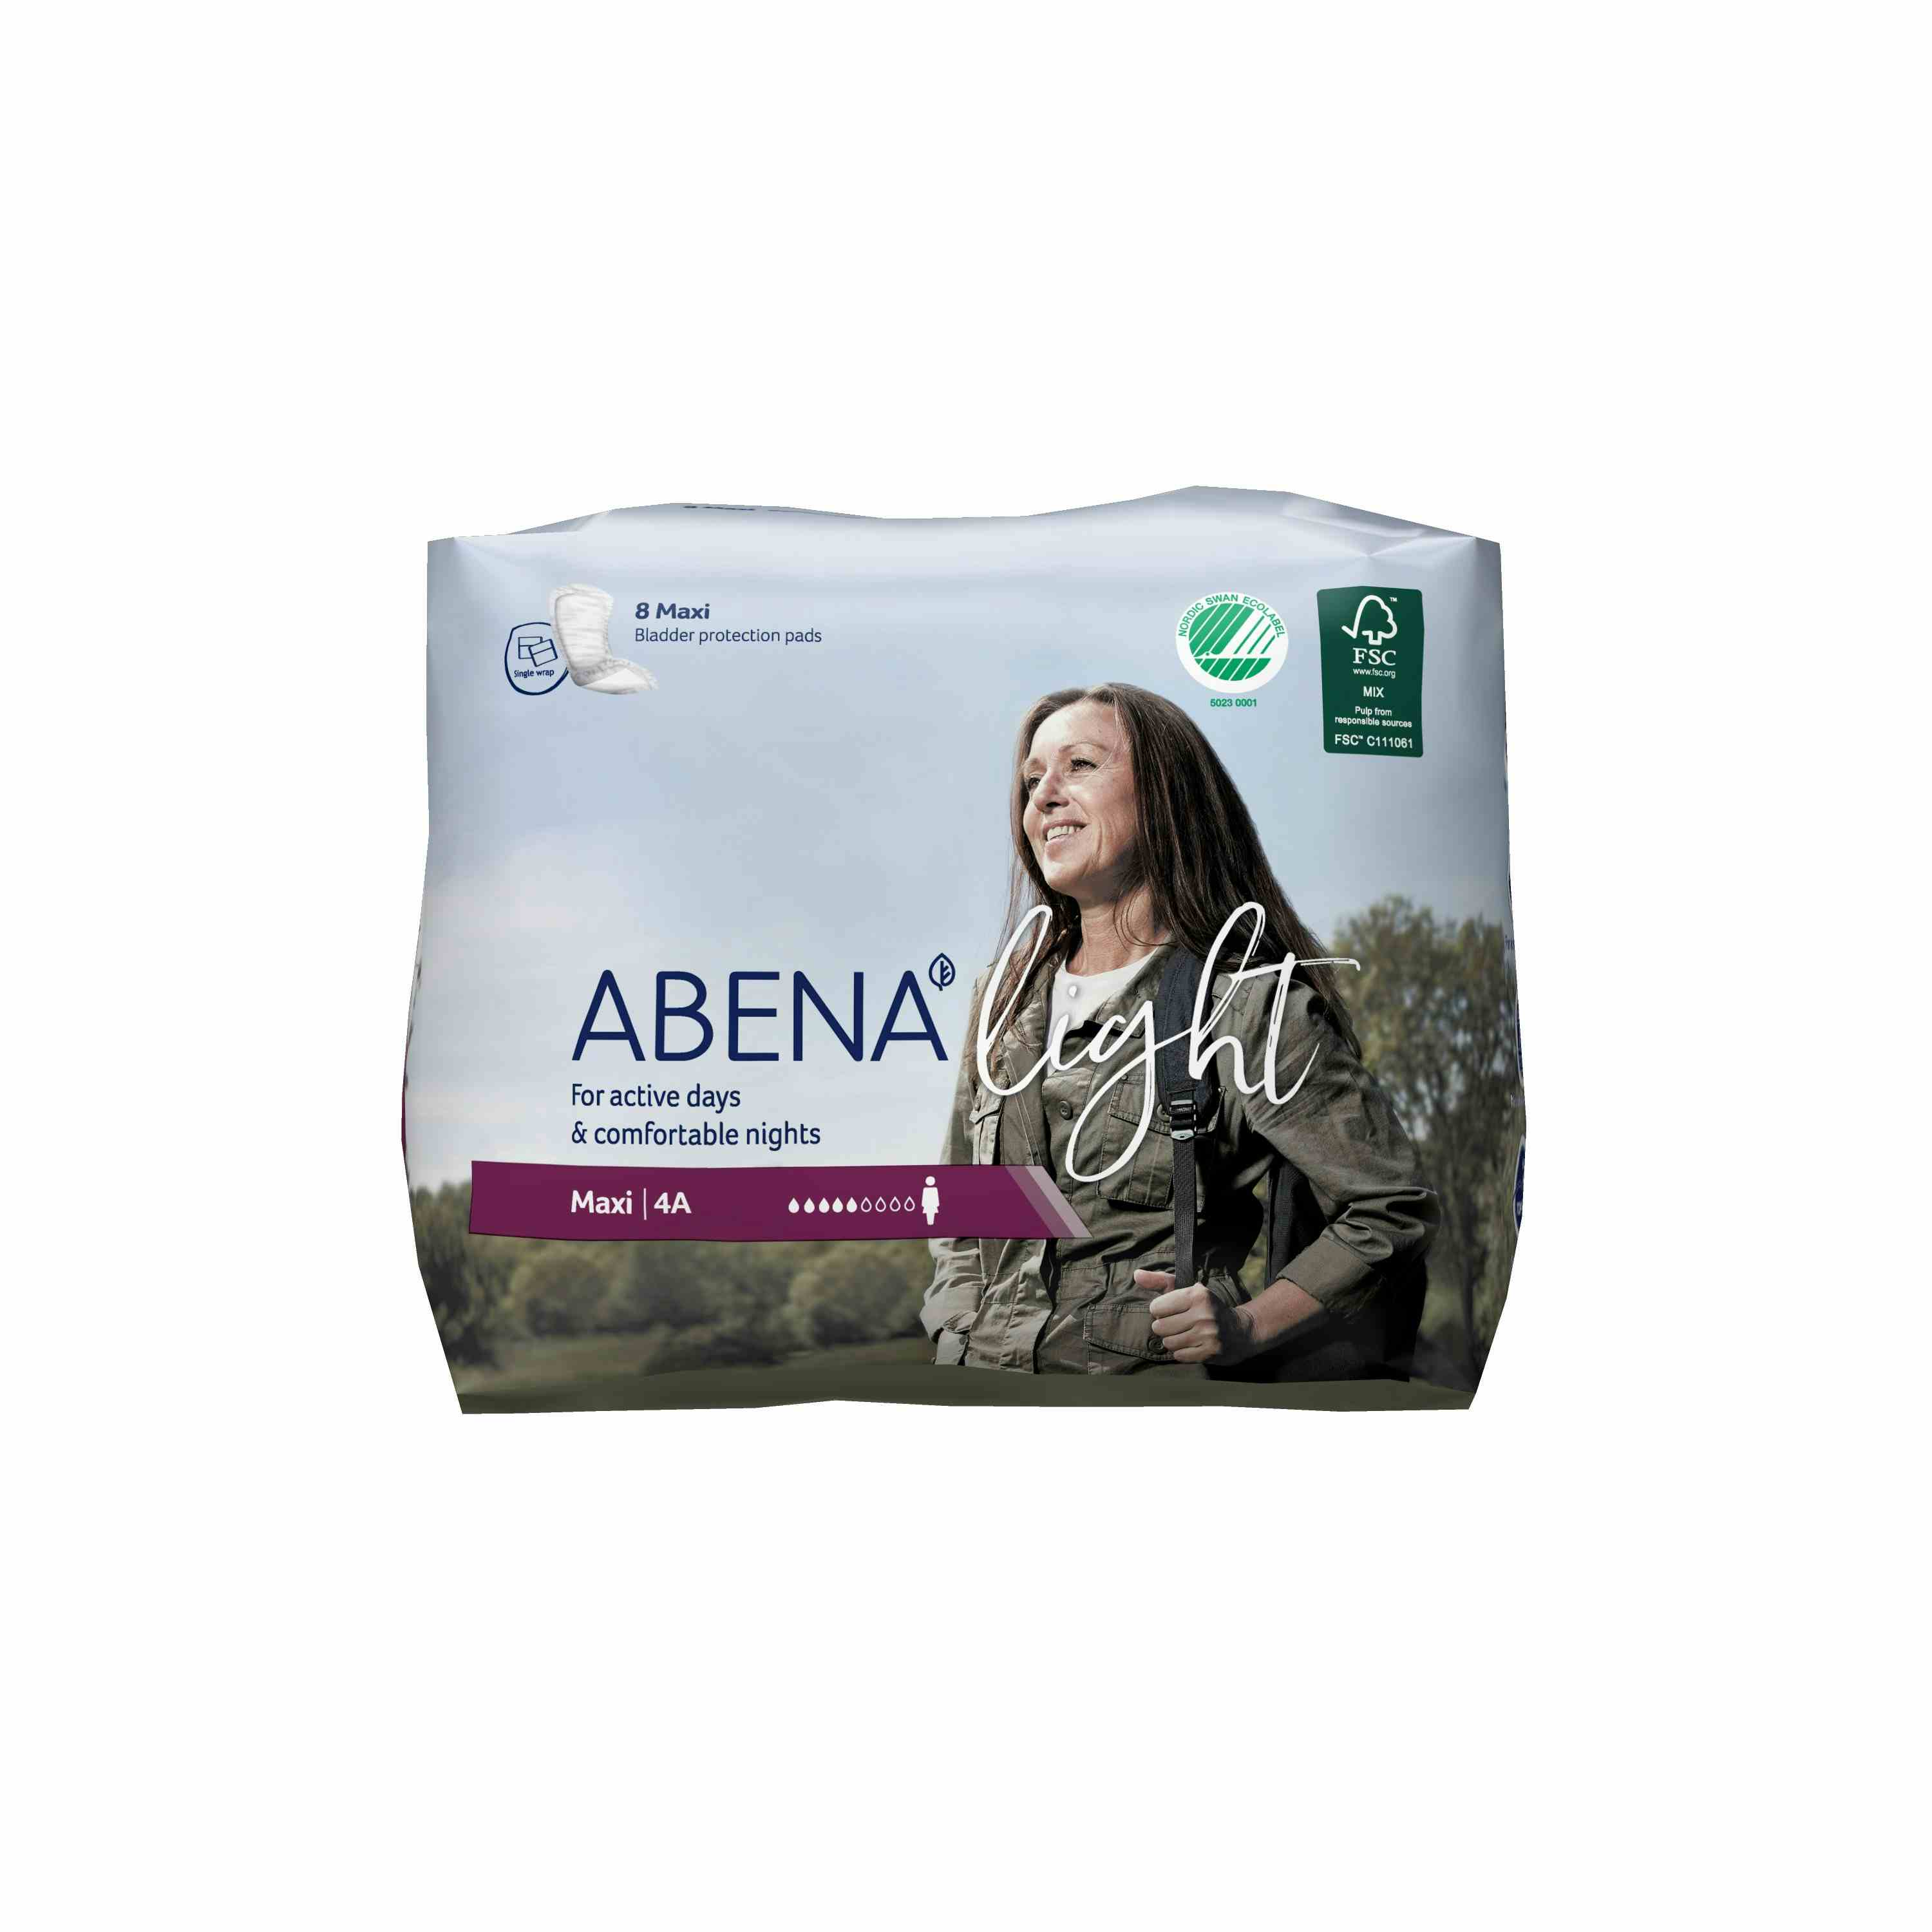 Abena Light Maxi Disposable Unisex Adult Bladder Control Pad, Moderate Absorbency, 1000005437, One Size Fits Most -  Case of 48